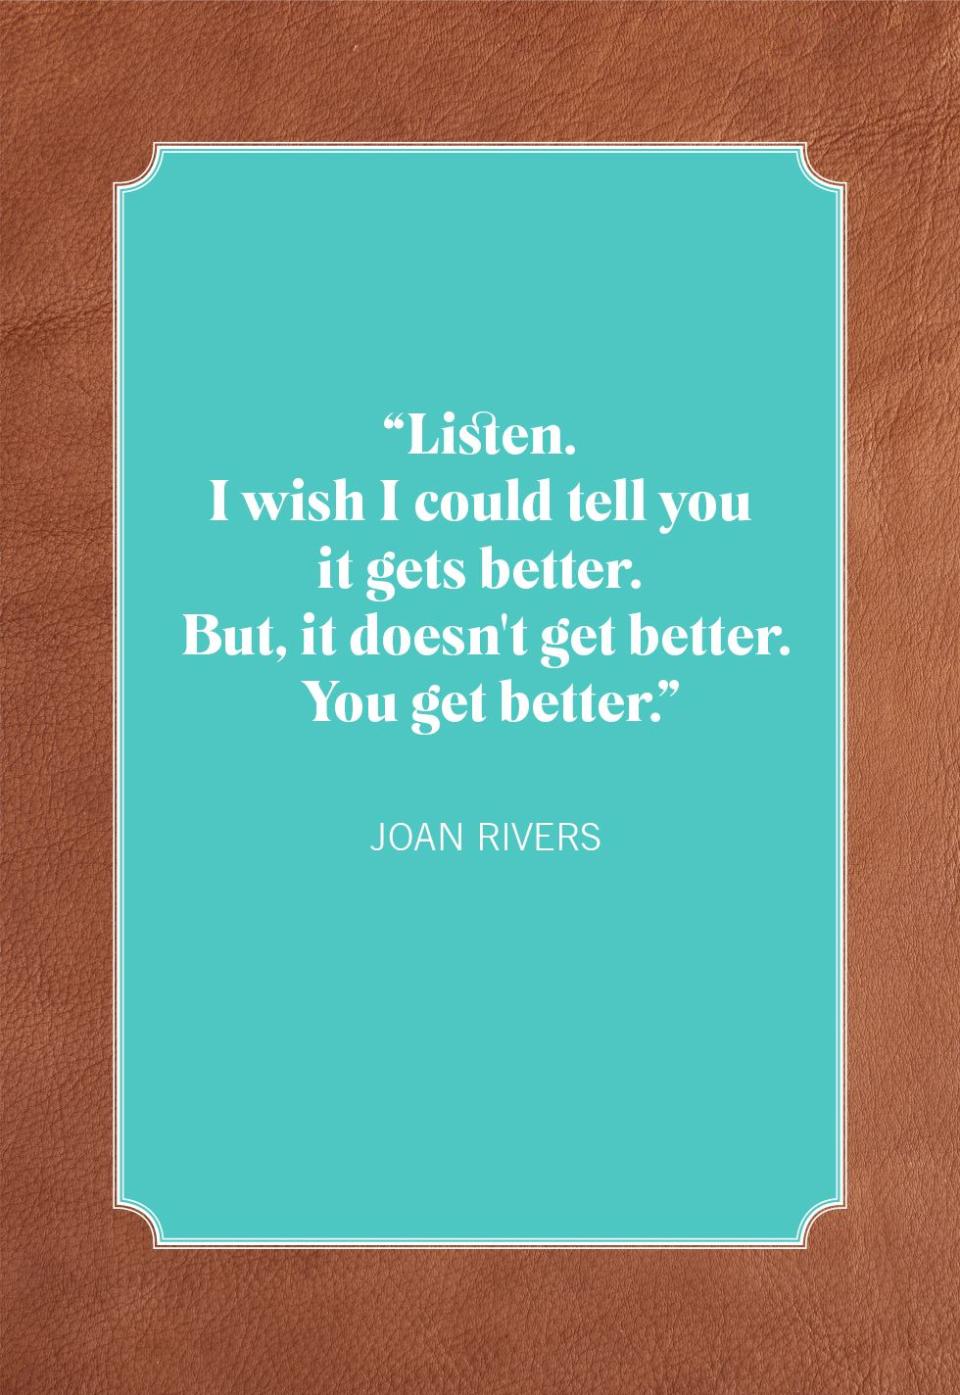 new year quotes joan rivers